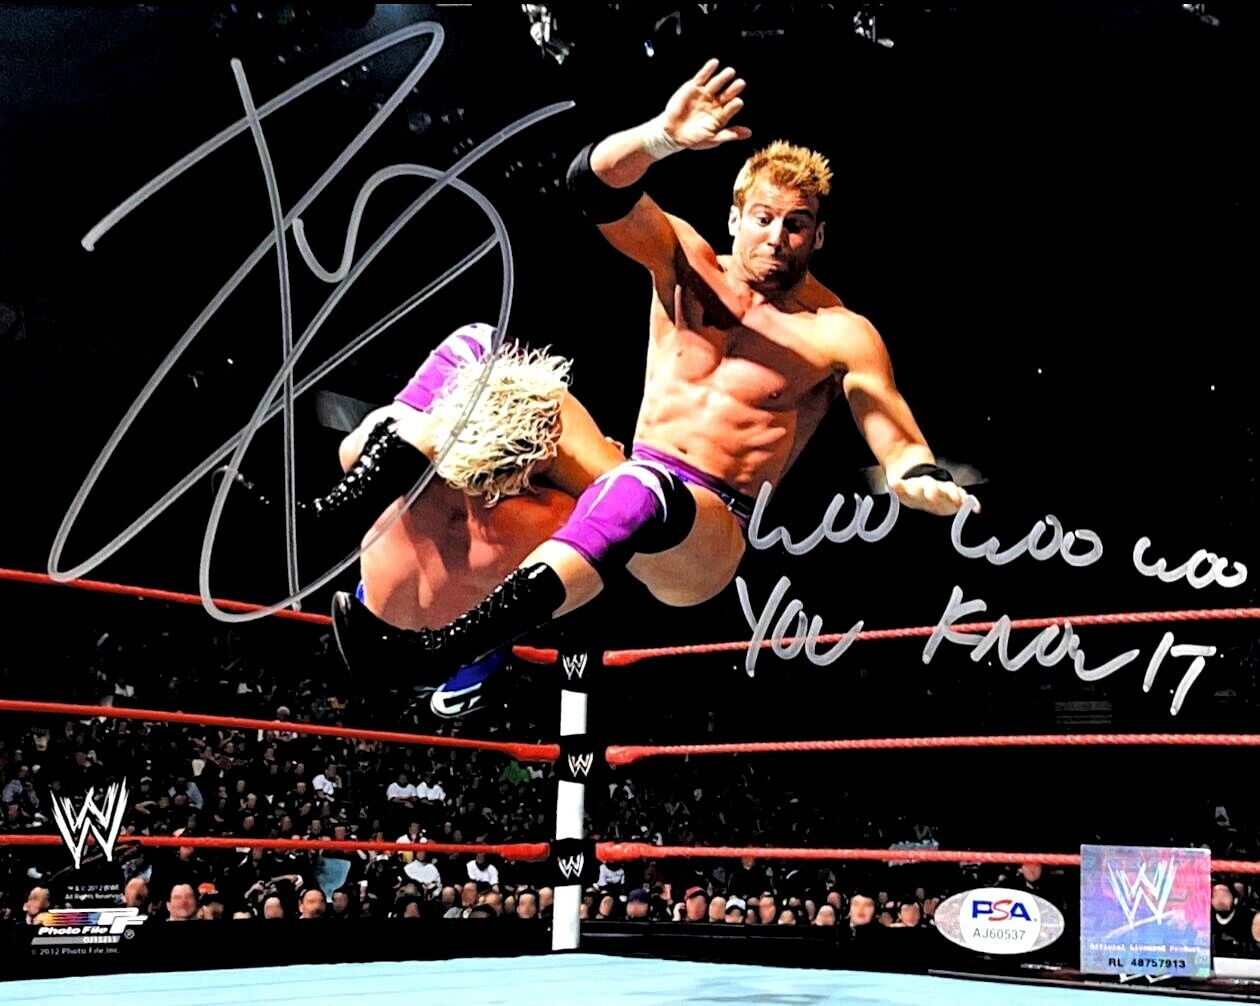 WWE ZACK RYDER HAND SIGNED AUTOGRAPHED Photo Poster painting WITH PROOF AND PSA DNA COA 9